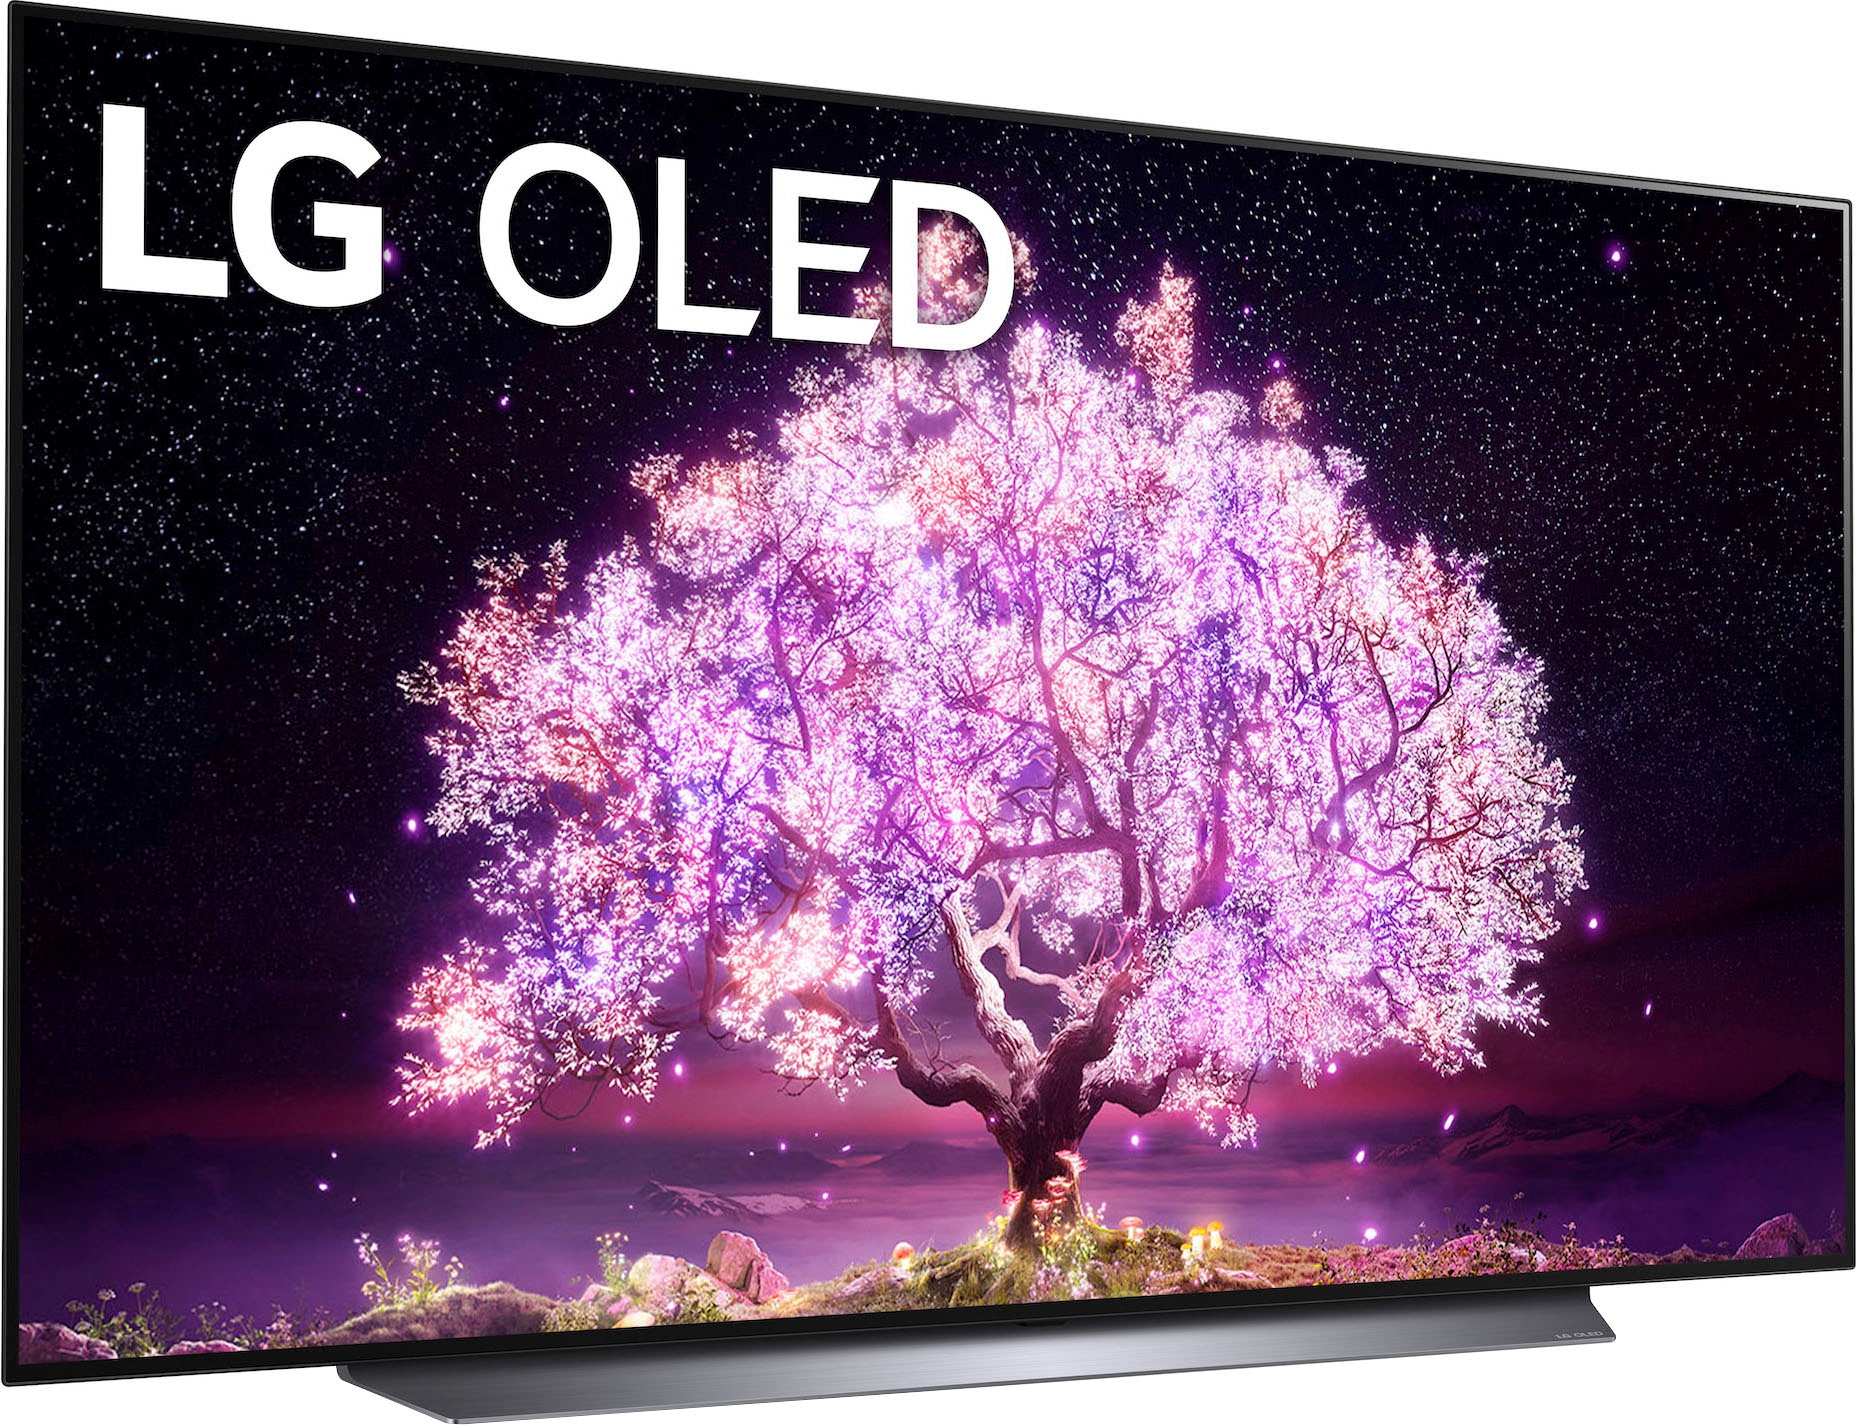 LG OLED-Fernseher »OLED77C17LB«, 195 cm/77 Atmos & jetzt HD, OLED Smart-TV, 4K bei OTTO ,α9 Gen4 Dolby AI-Prozessor,Dolby Ultra 4K Vision kaufen Zoll